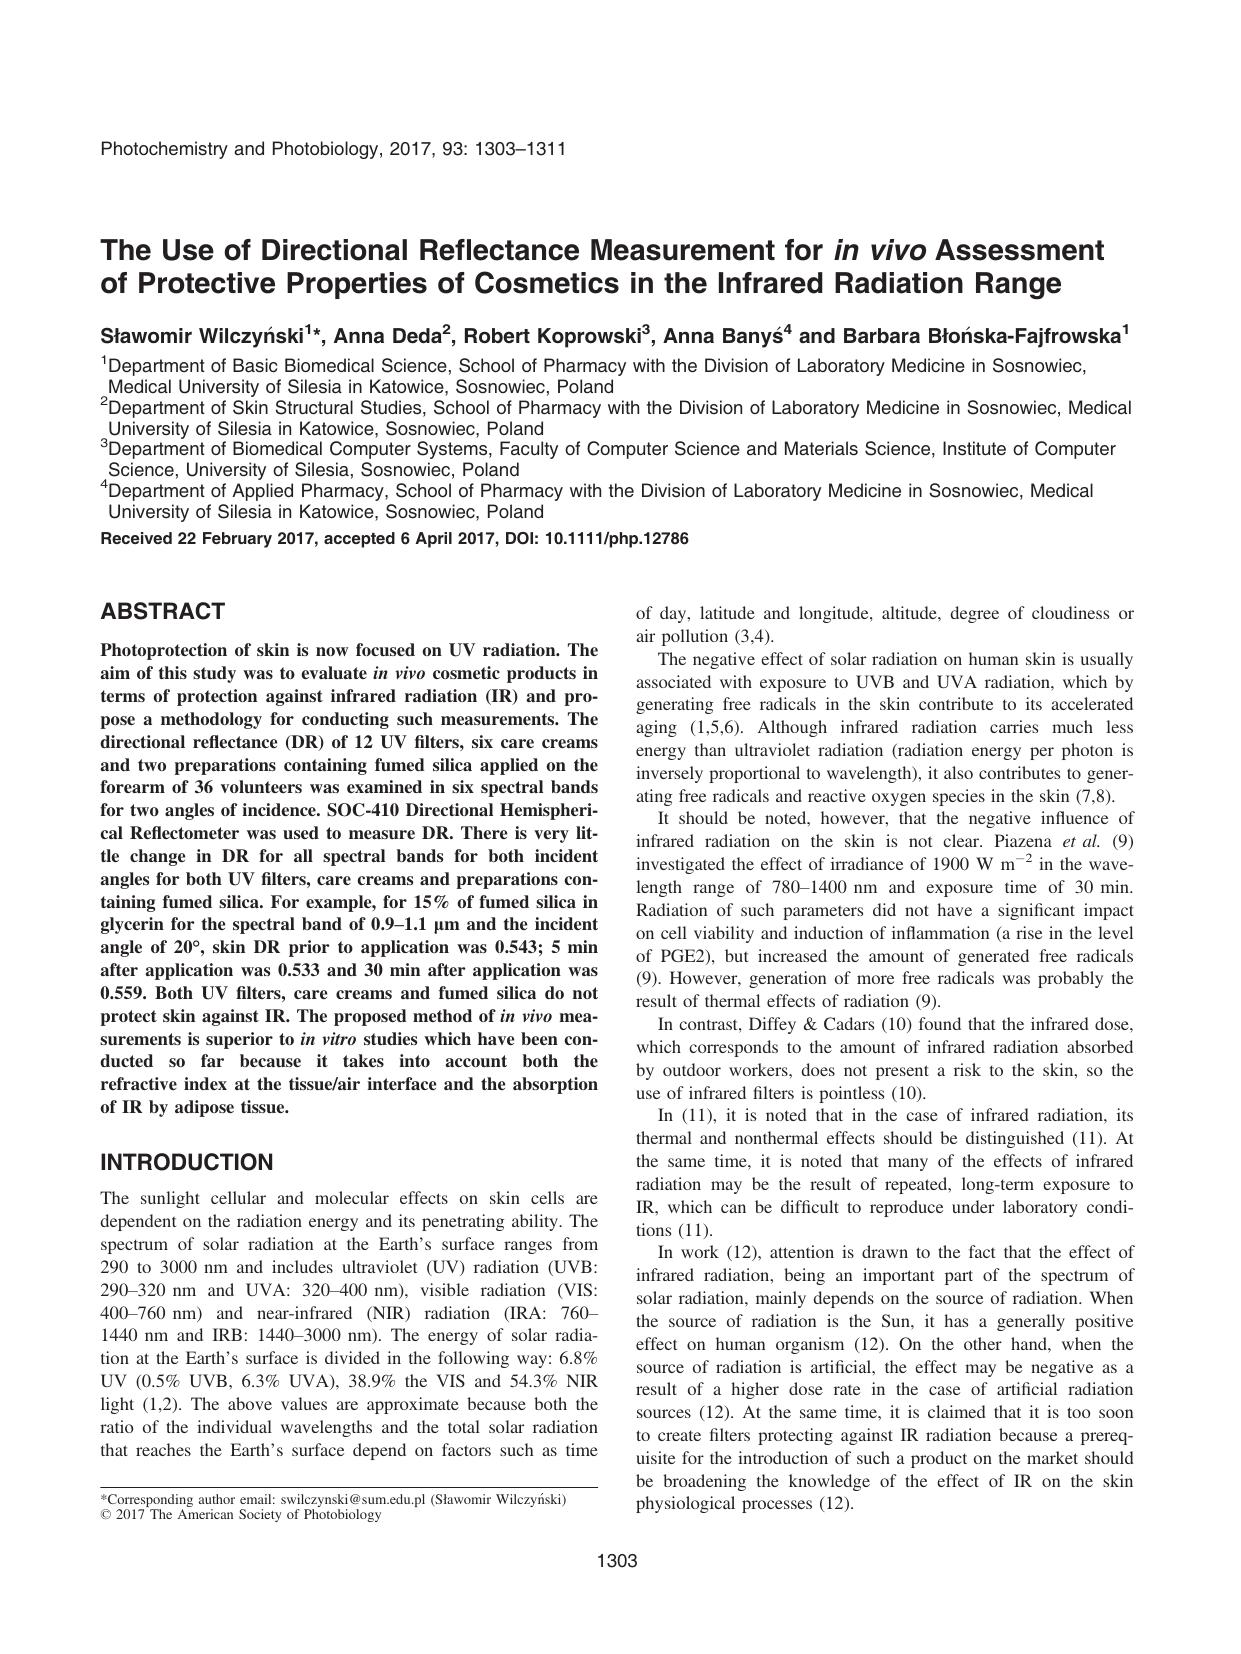 The Use of Directional Reflectance Measurement for in vivo Assessment of Protective Properties of Cosmetics in the Infrared Radiation Range by Unknown